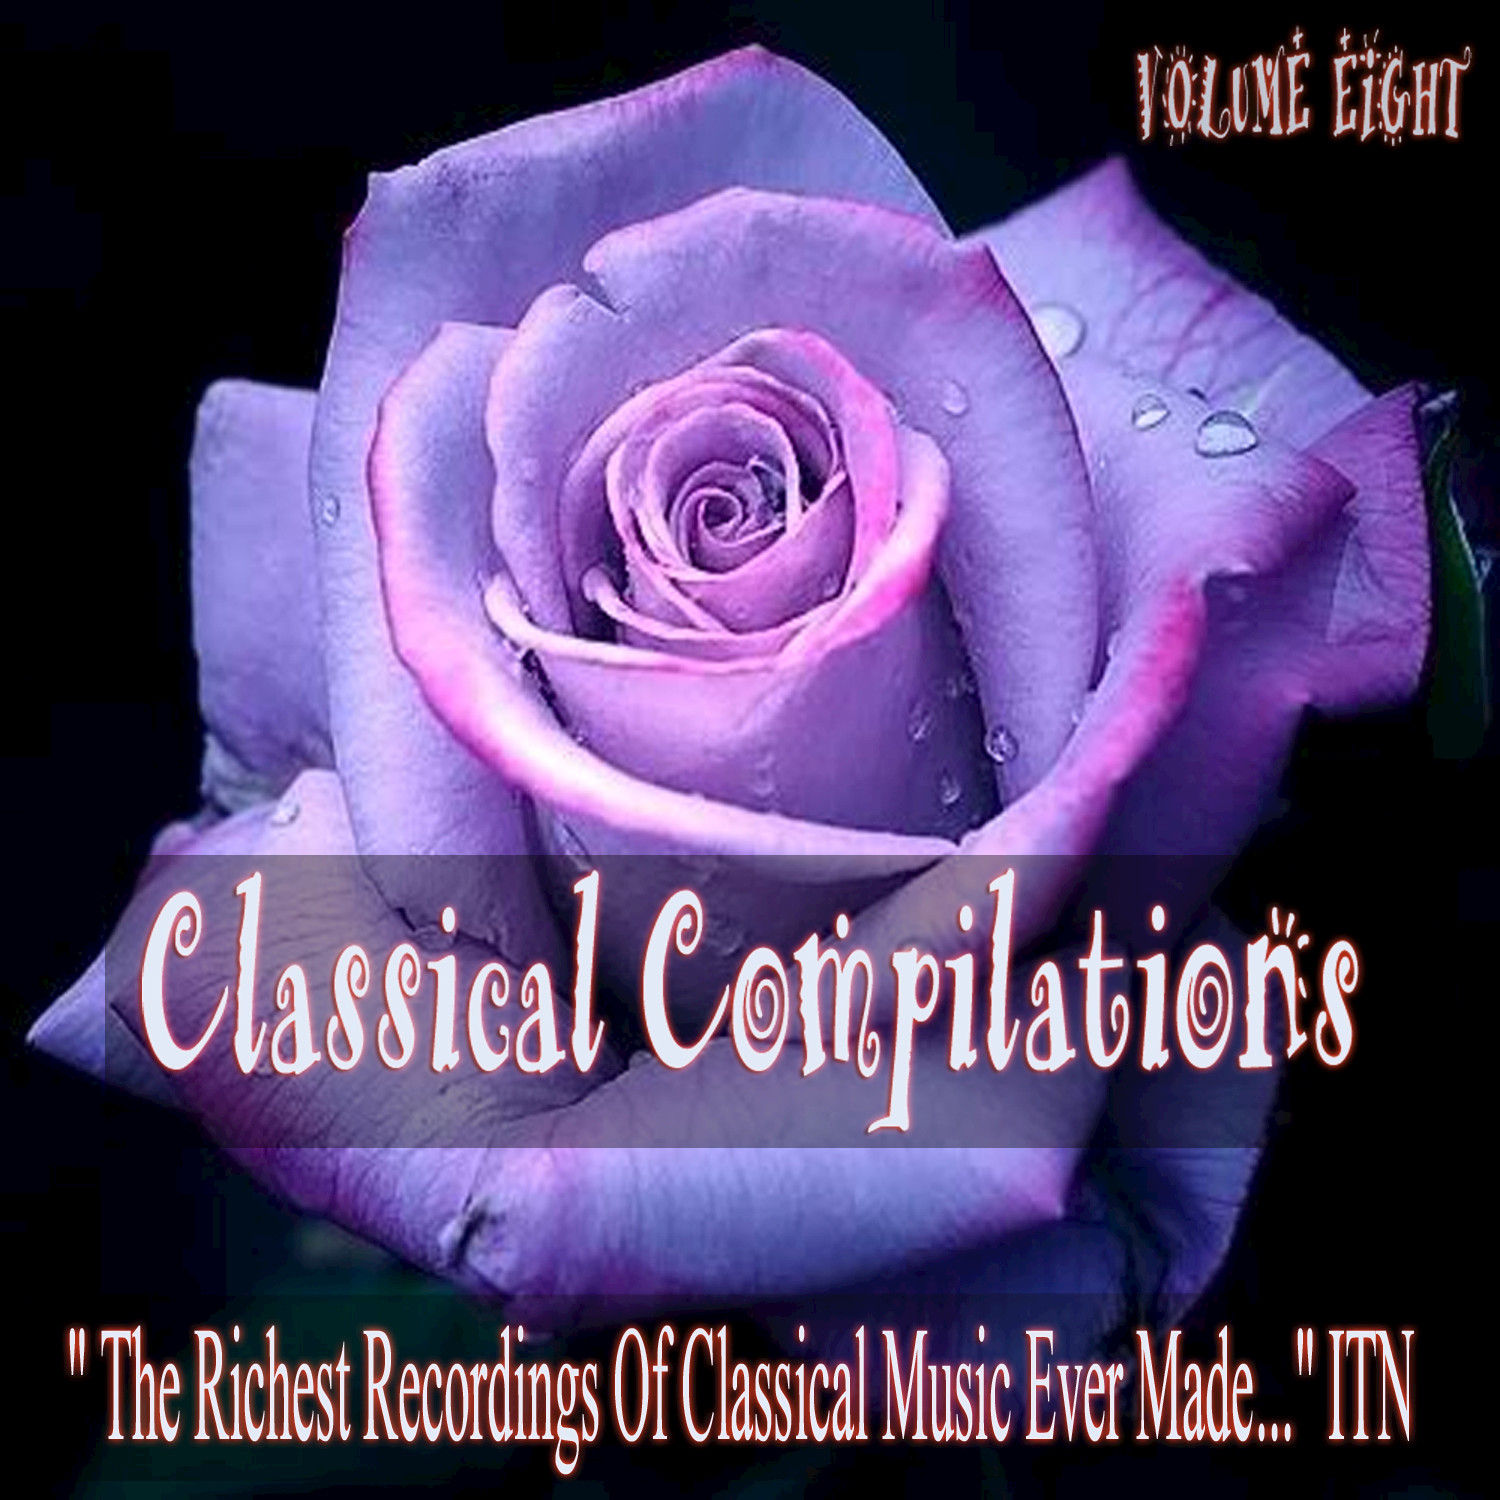 Classical Compilations, Vol. Eight